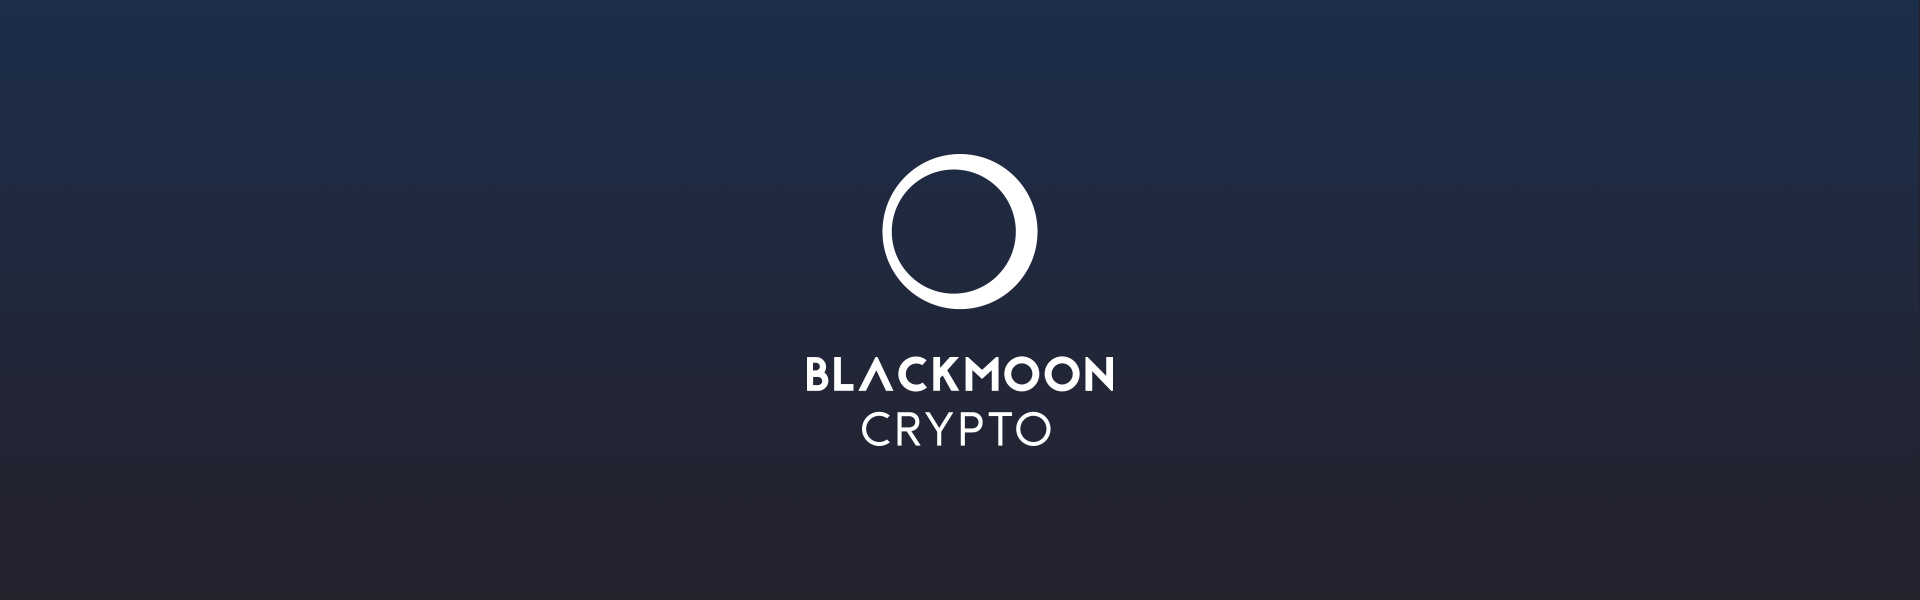 Blackmoon crypto login forex trading charts eur/usd forecast for today